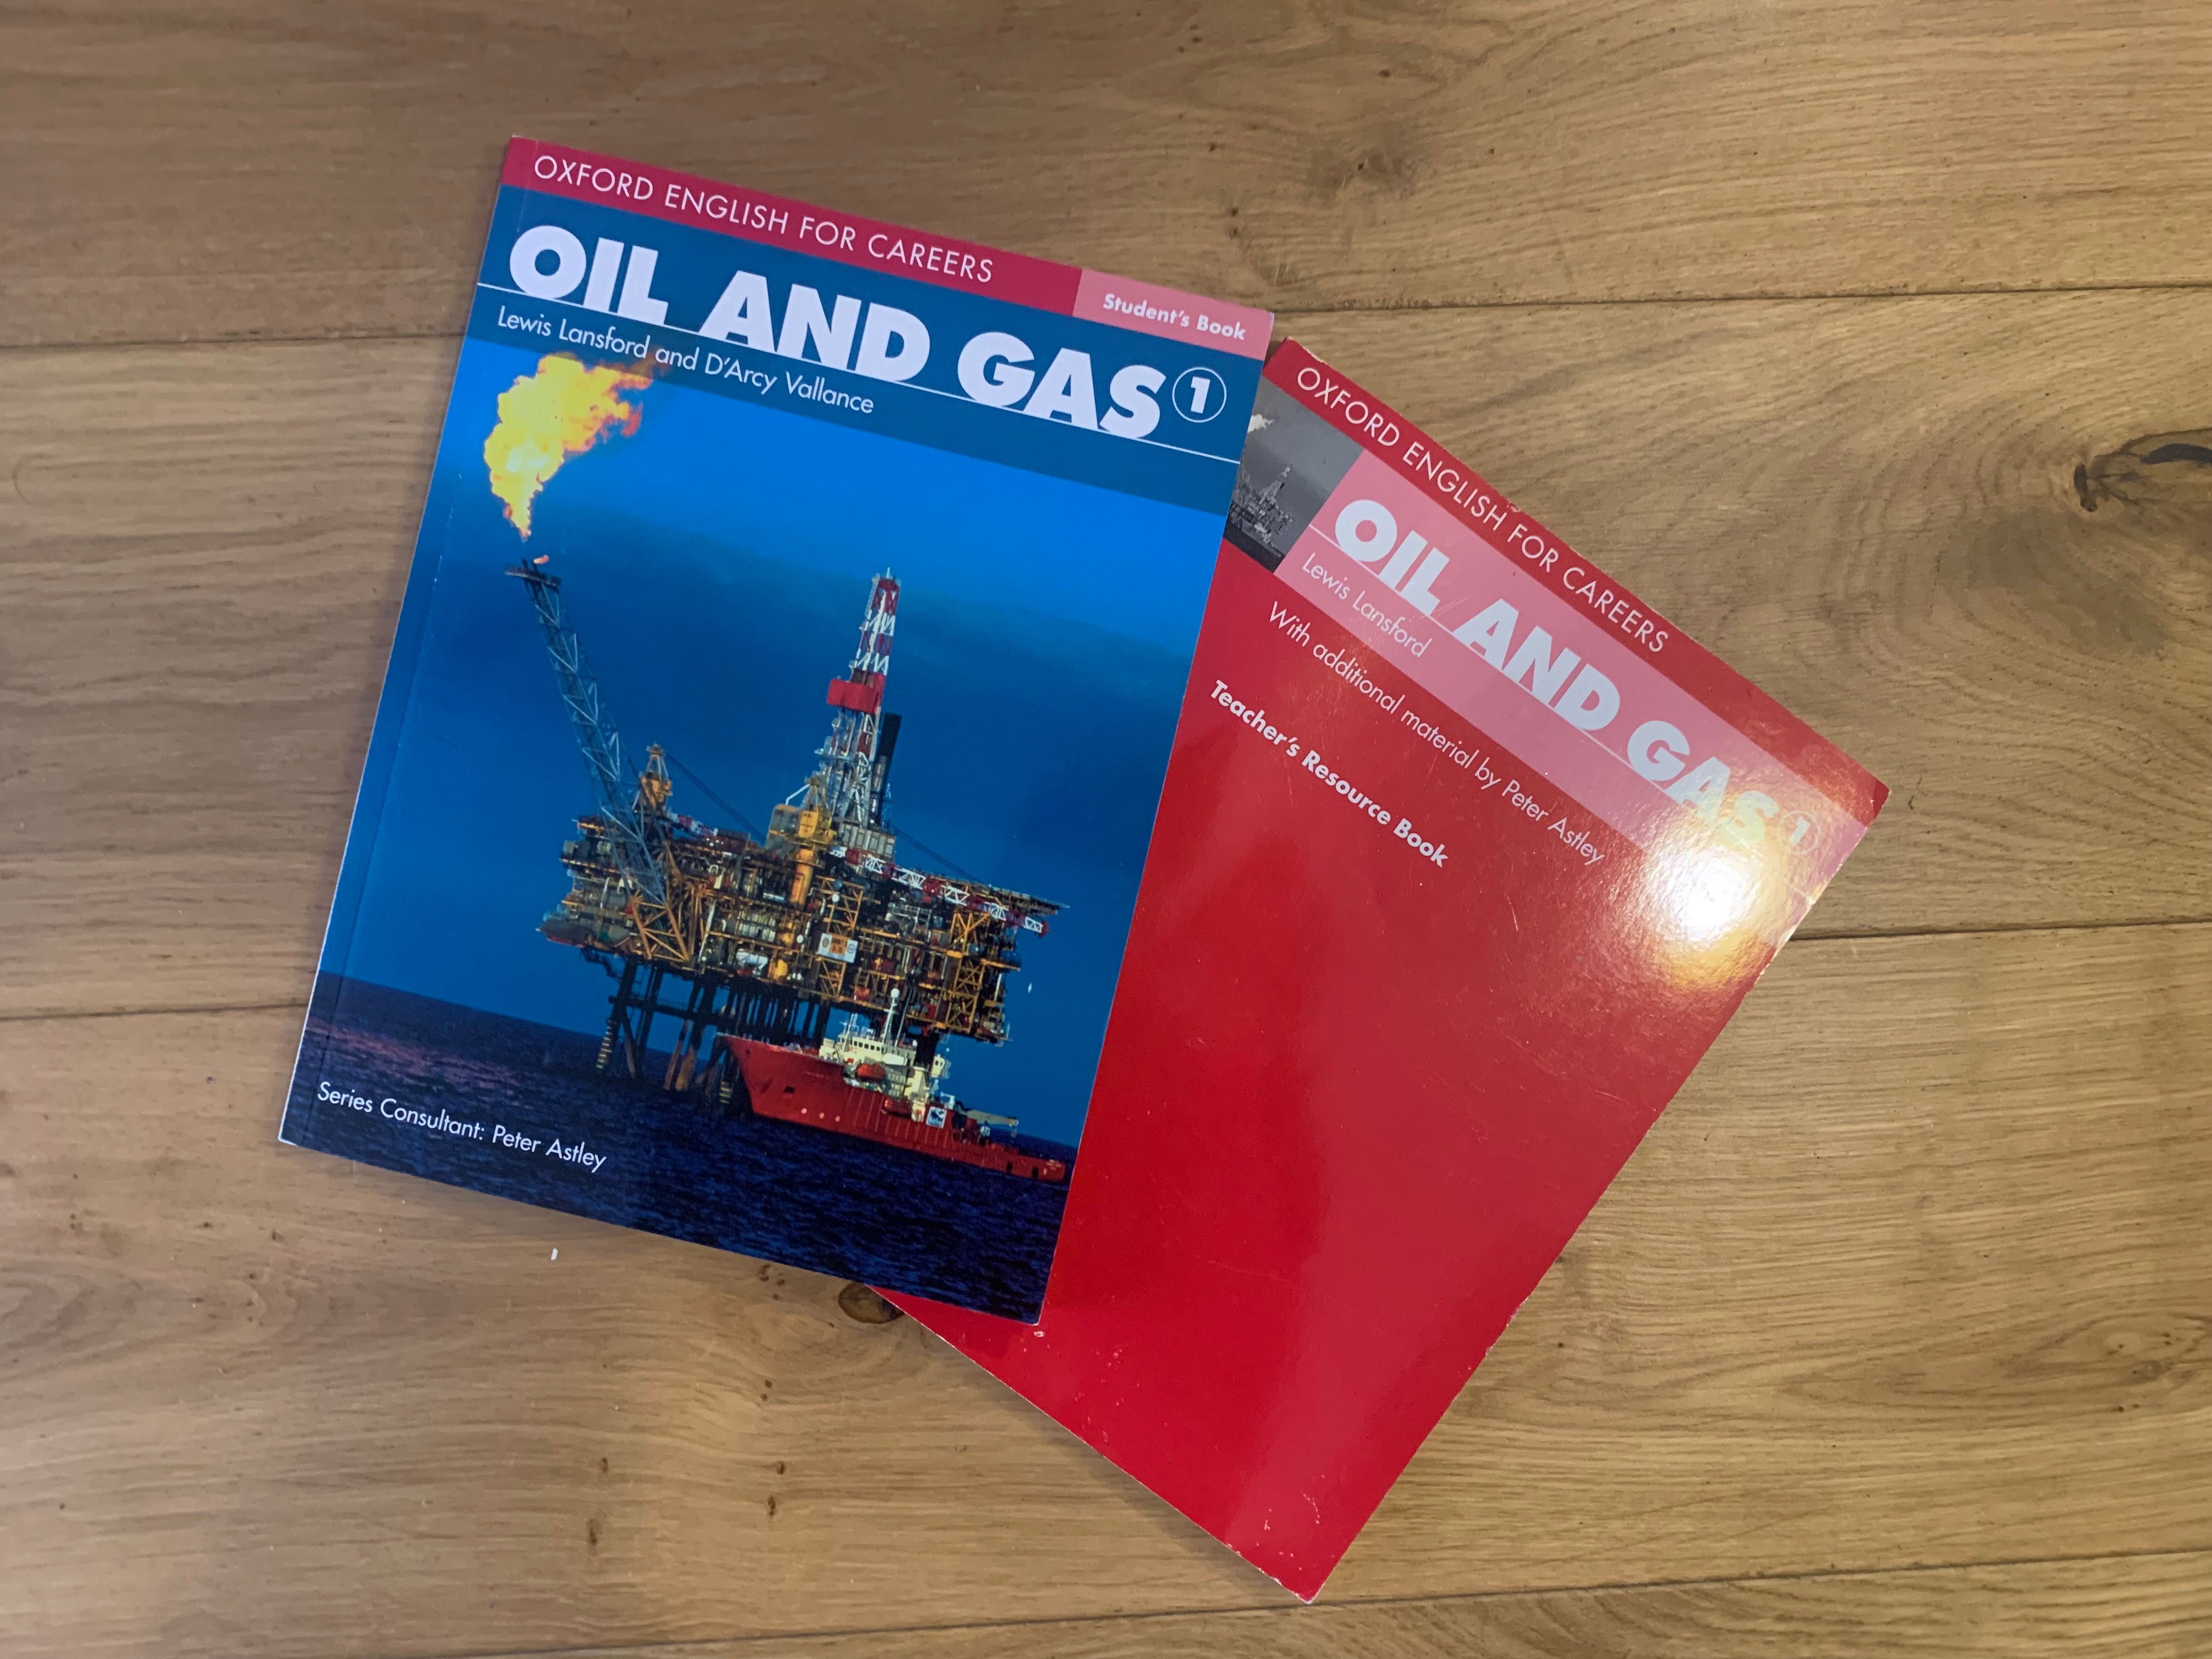 Oxford English for Careers Oil & Gas; L. Landsford, D'Arcy Vallance